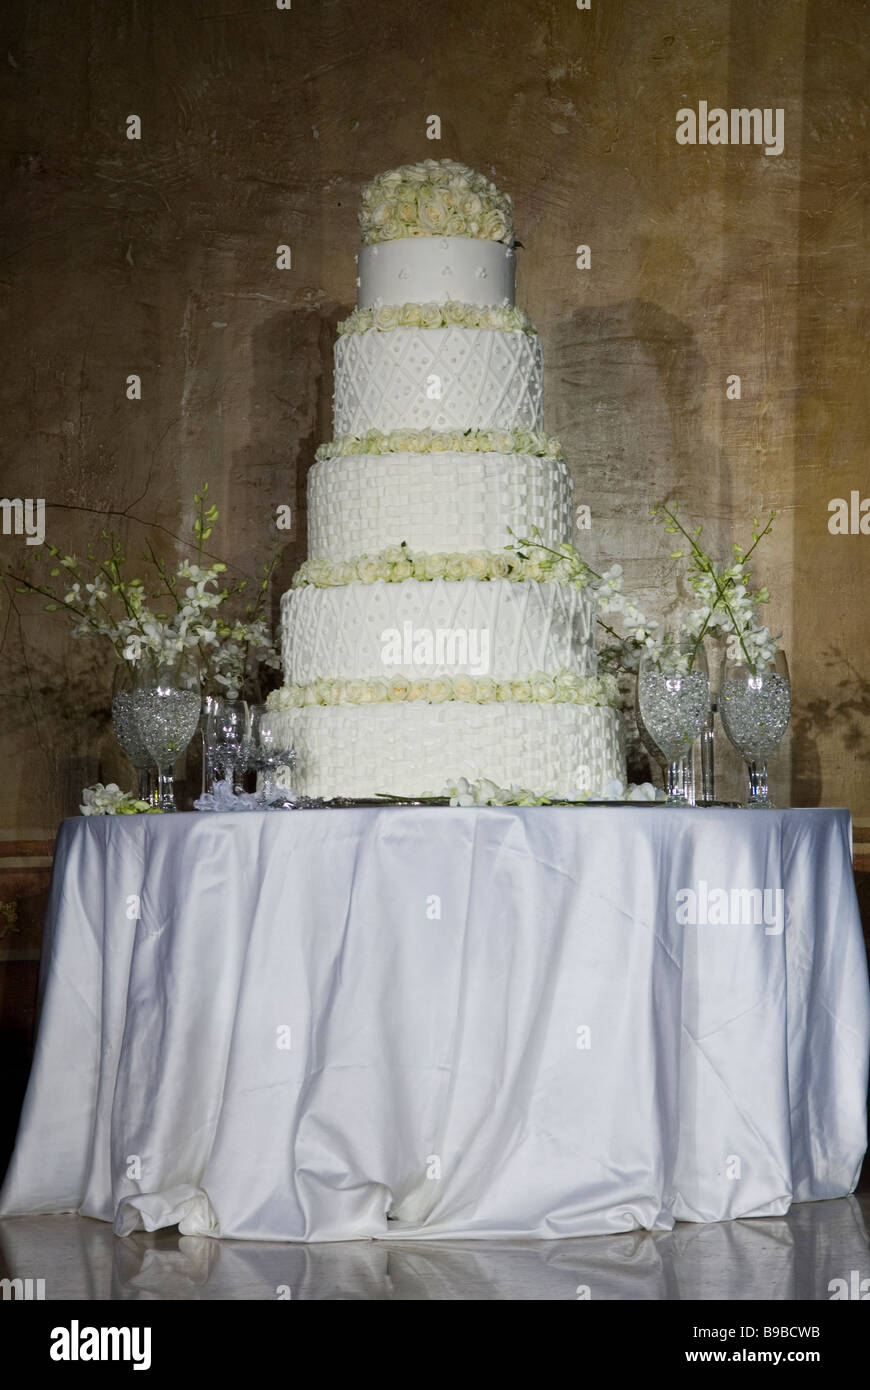 Tiered wedding cake on table Beirut Lebanon Middle East Asia Stock Photo